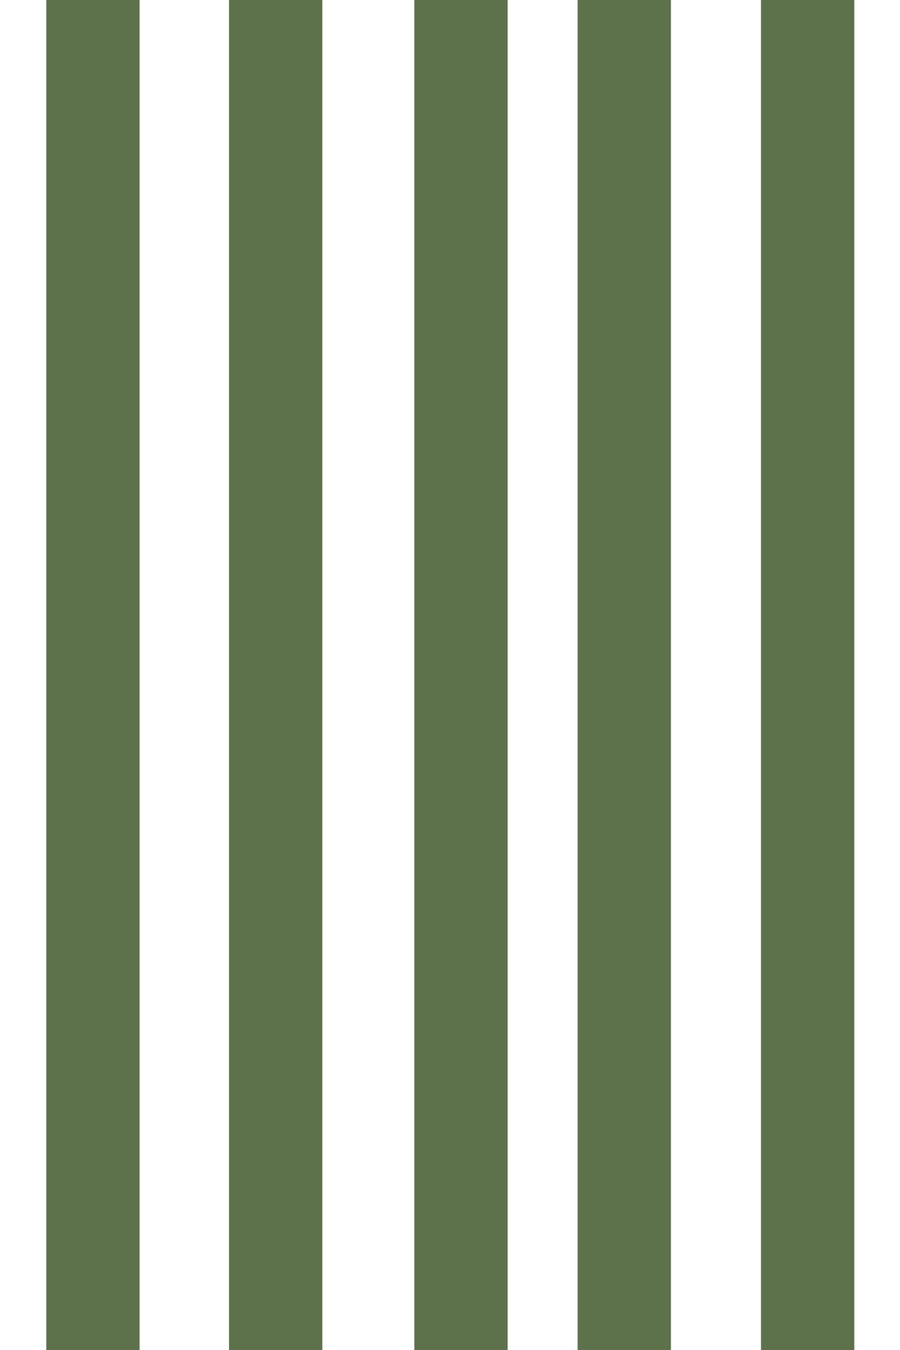 Woolf With Me Fitted Crib Sheet Stripes color_kale